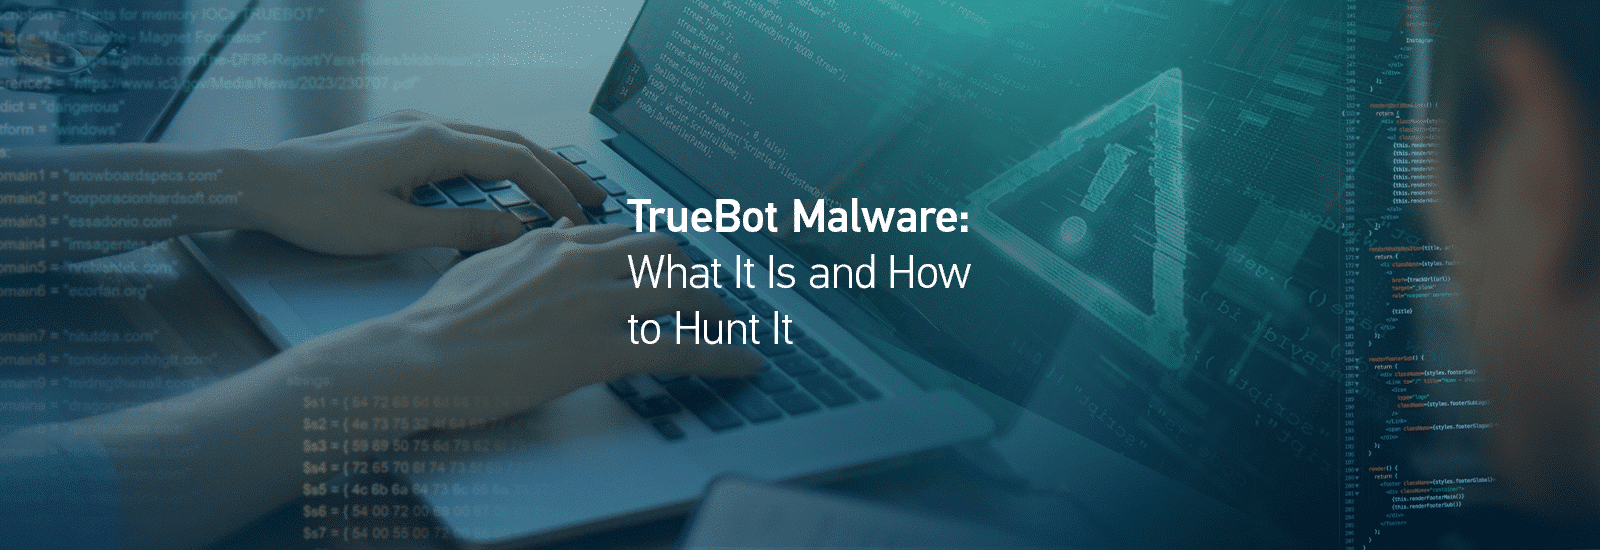 A decorative header for the TrueBot Malware post